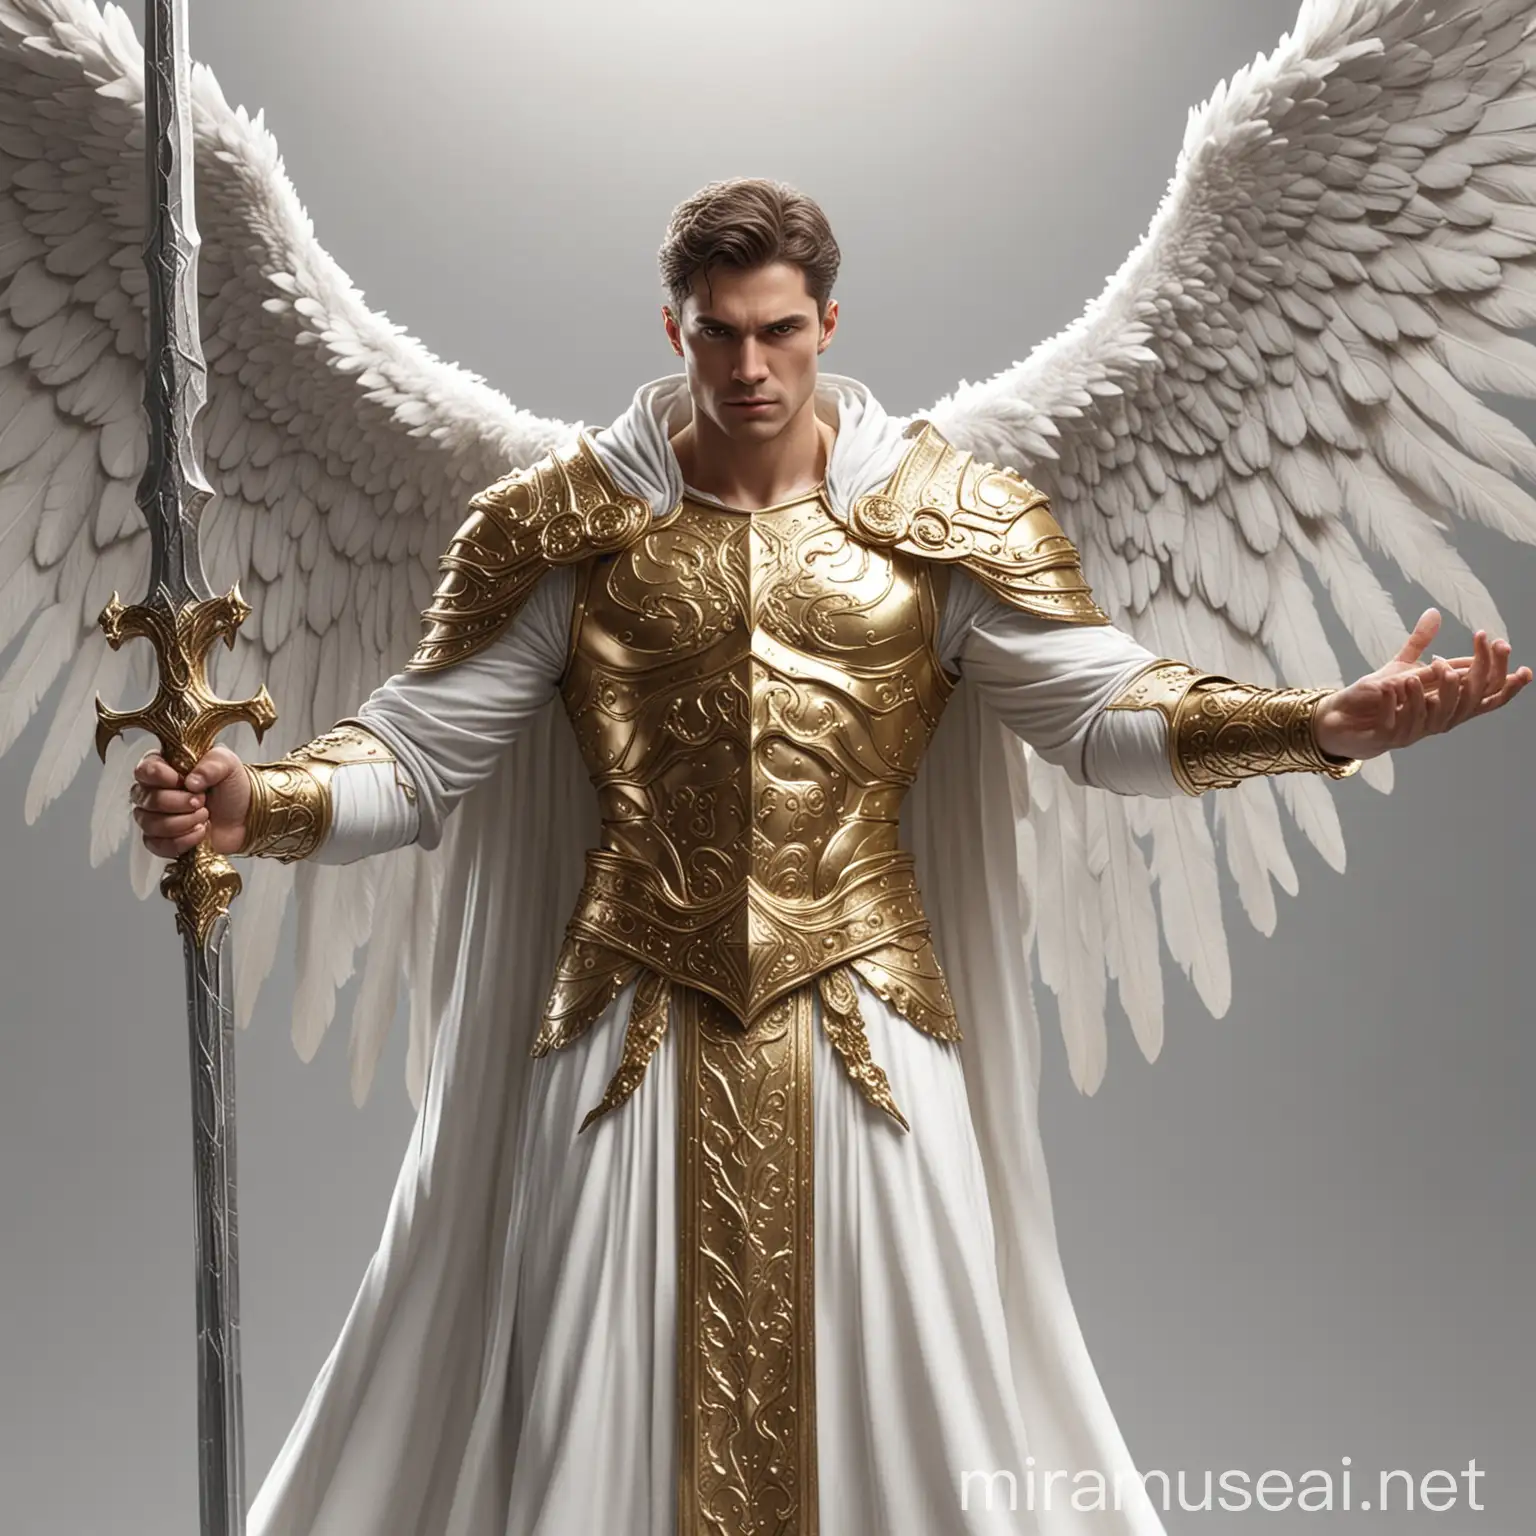 Majestic Male Angel with Six White Wings and Golden Armor Holding Silver Giant Sword